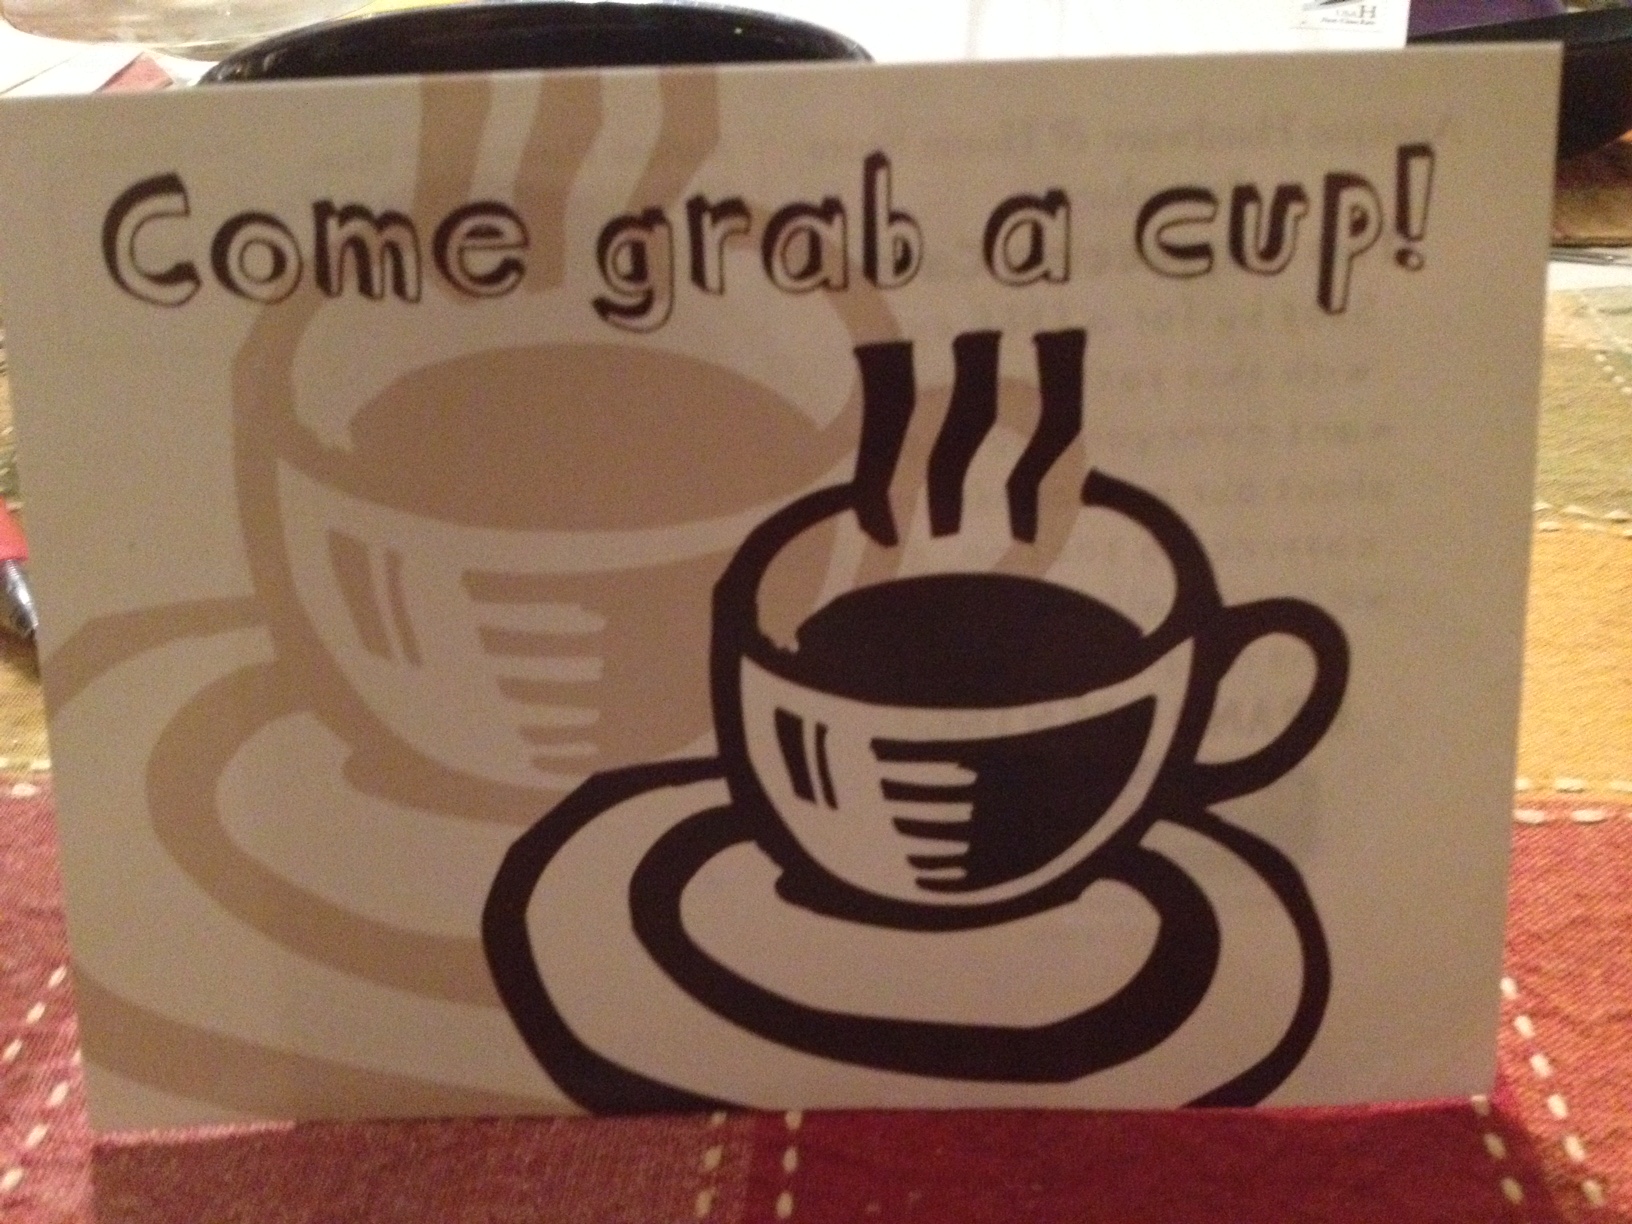 Photo showing a 'Come grab a cup' placard